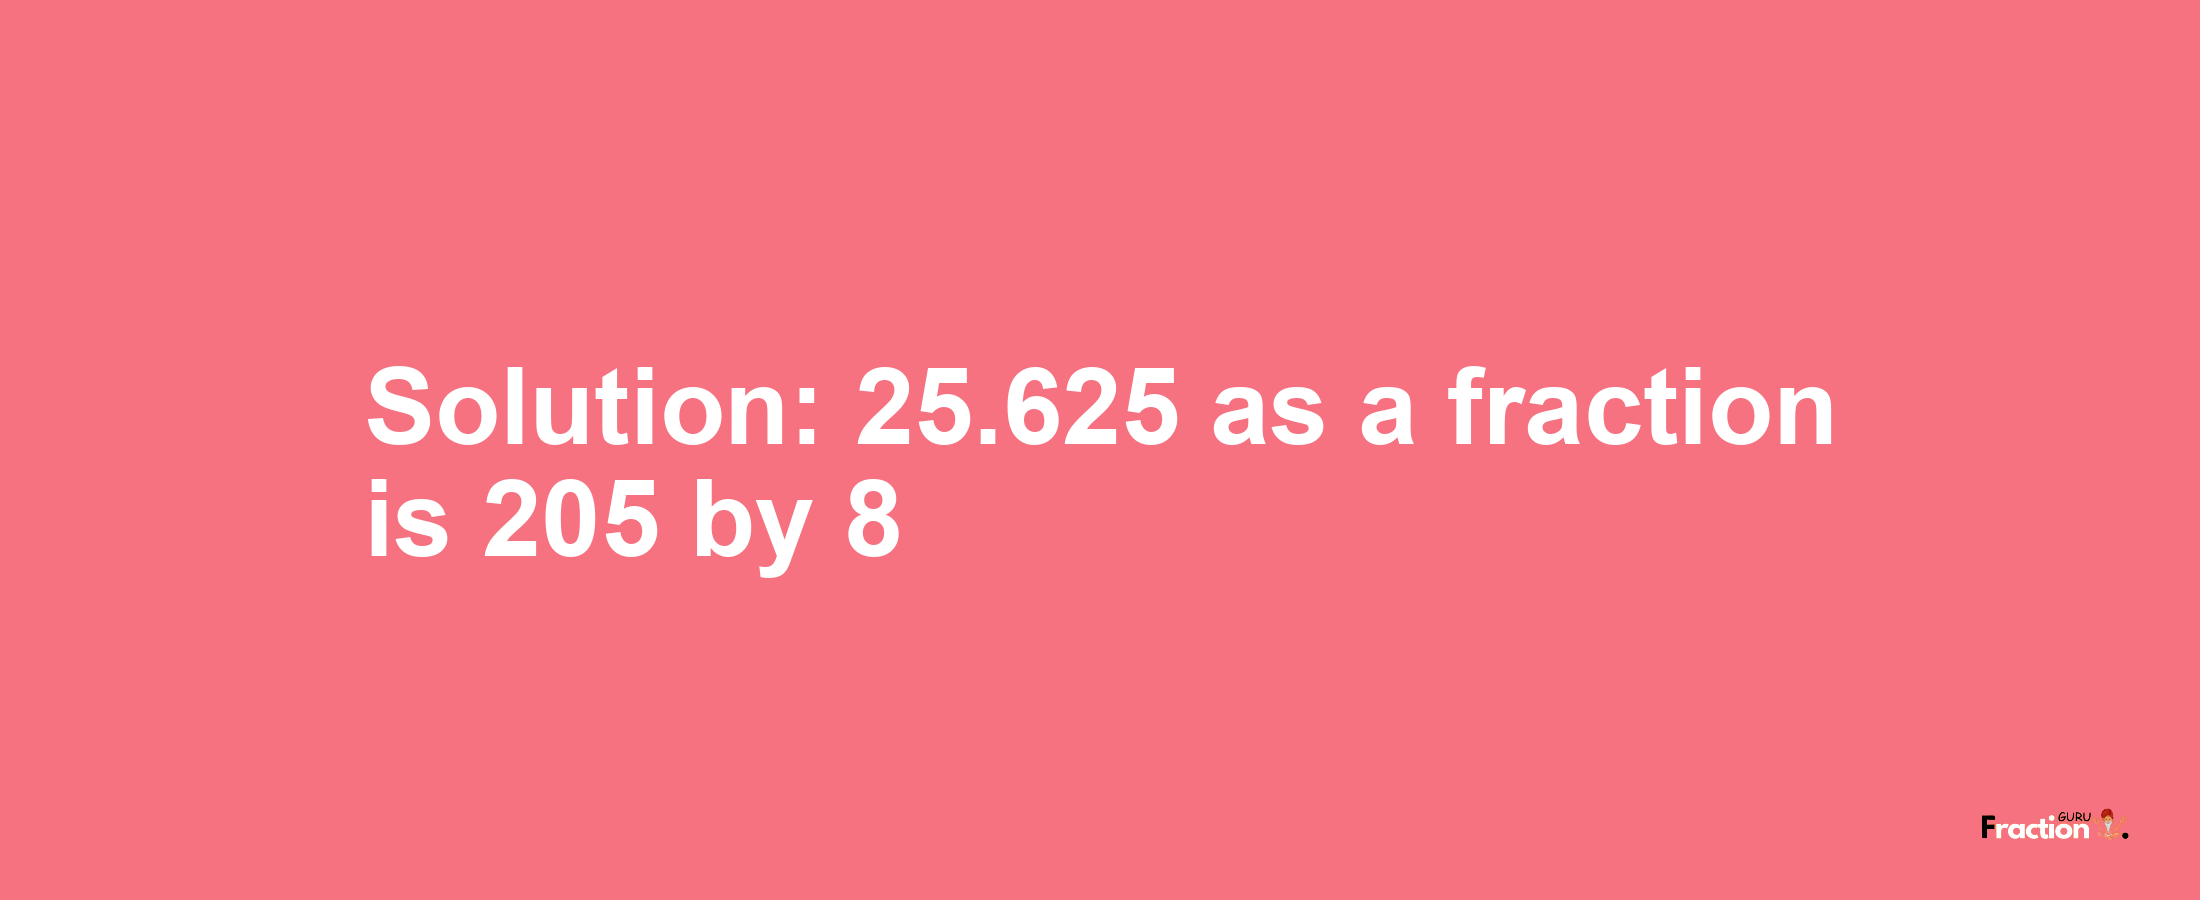 Solution:25.625 as a fraction is 205/8